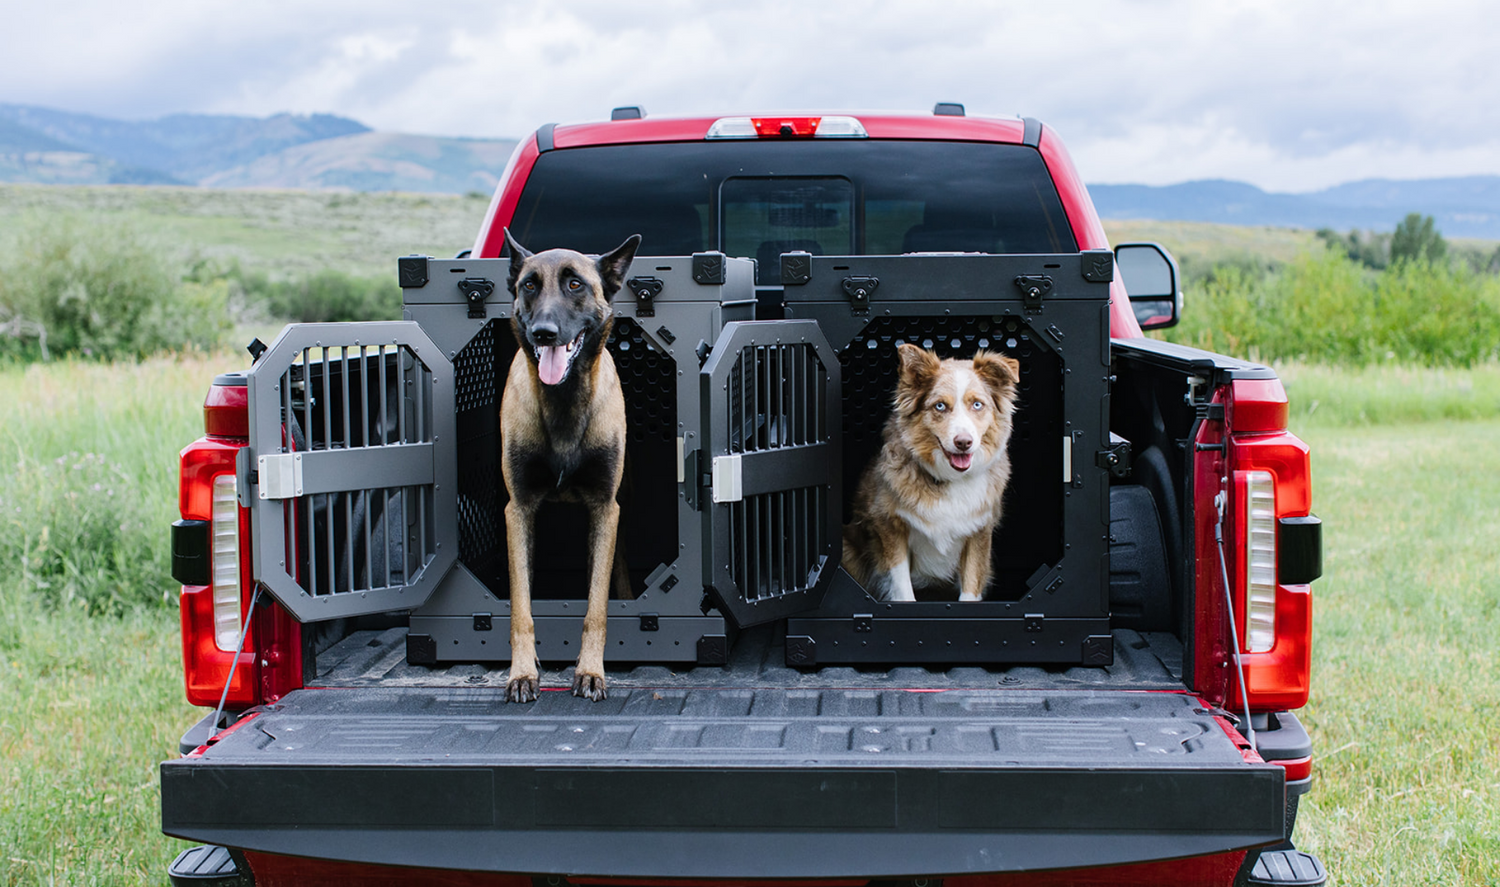 Two collapsible crates by Rock Creek Crates, assembled with dogs in the back of a red truck bed